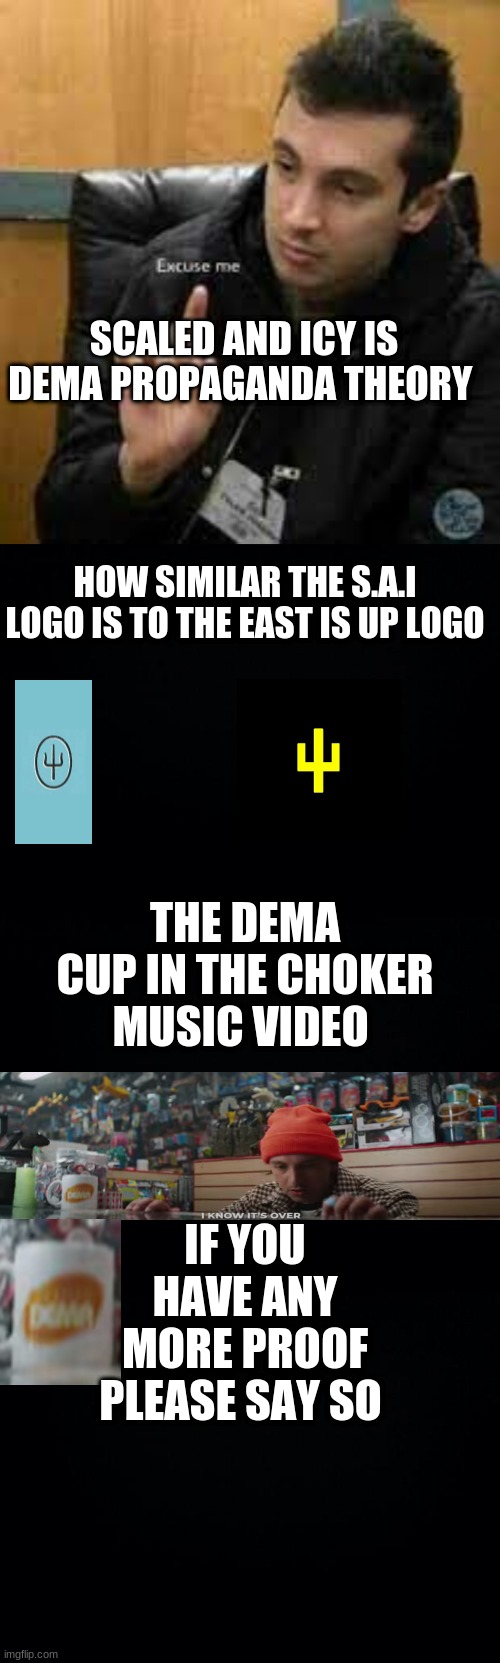 SCALED AND ICY IS DEMA PROPAGANDA THEORY; HOW SIMILAR THE S.A.I LOGO IS TO THE EAST IS UP LOGO; THE DEMA CUP IN THE CHOKER MUSIC VIDEO; IF YOU HAVE ANY MORE PROOF PLEASE SAY SO | image tagged in black background | made w/ Imgflip meme maker